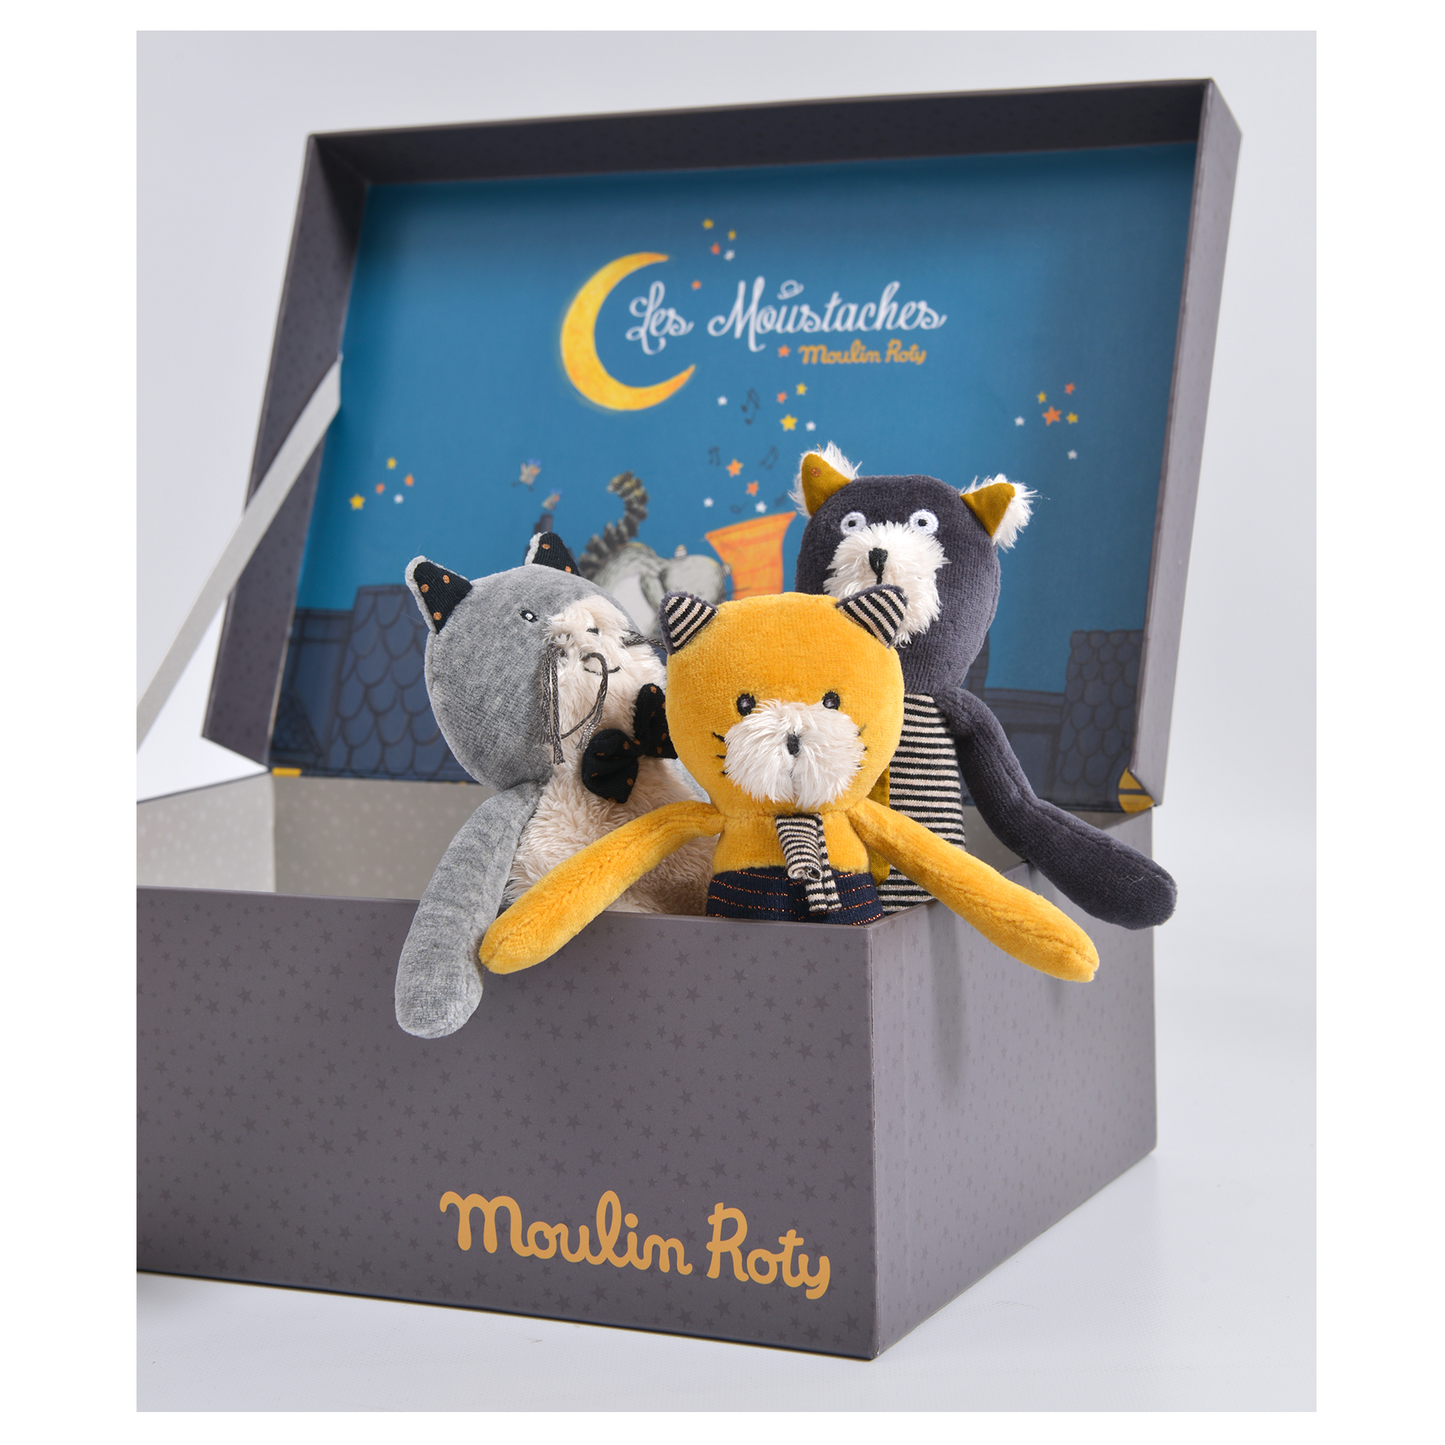 Moulin Roty Petite Fernand - Les Moustaches